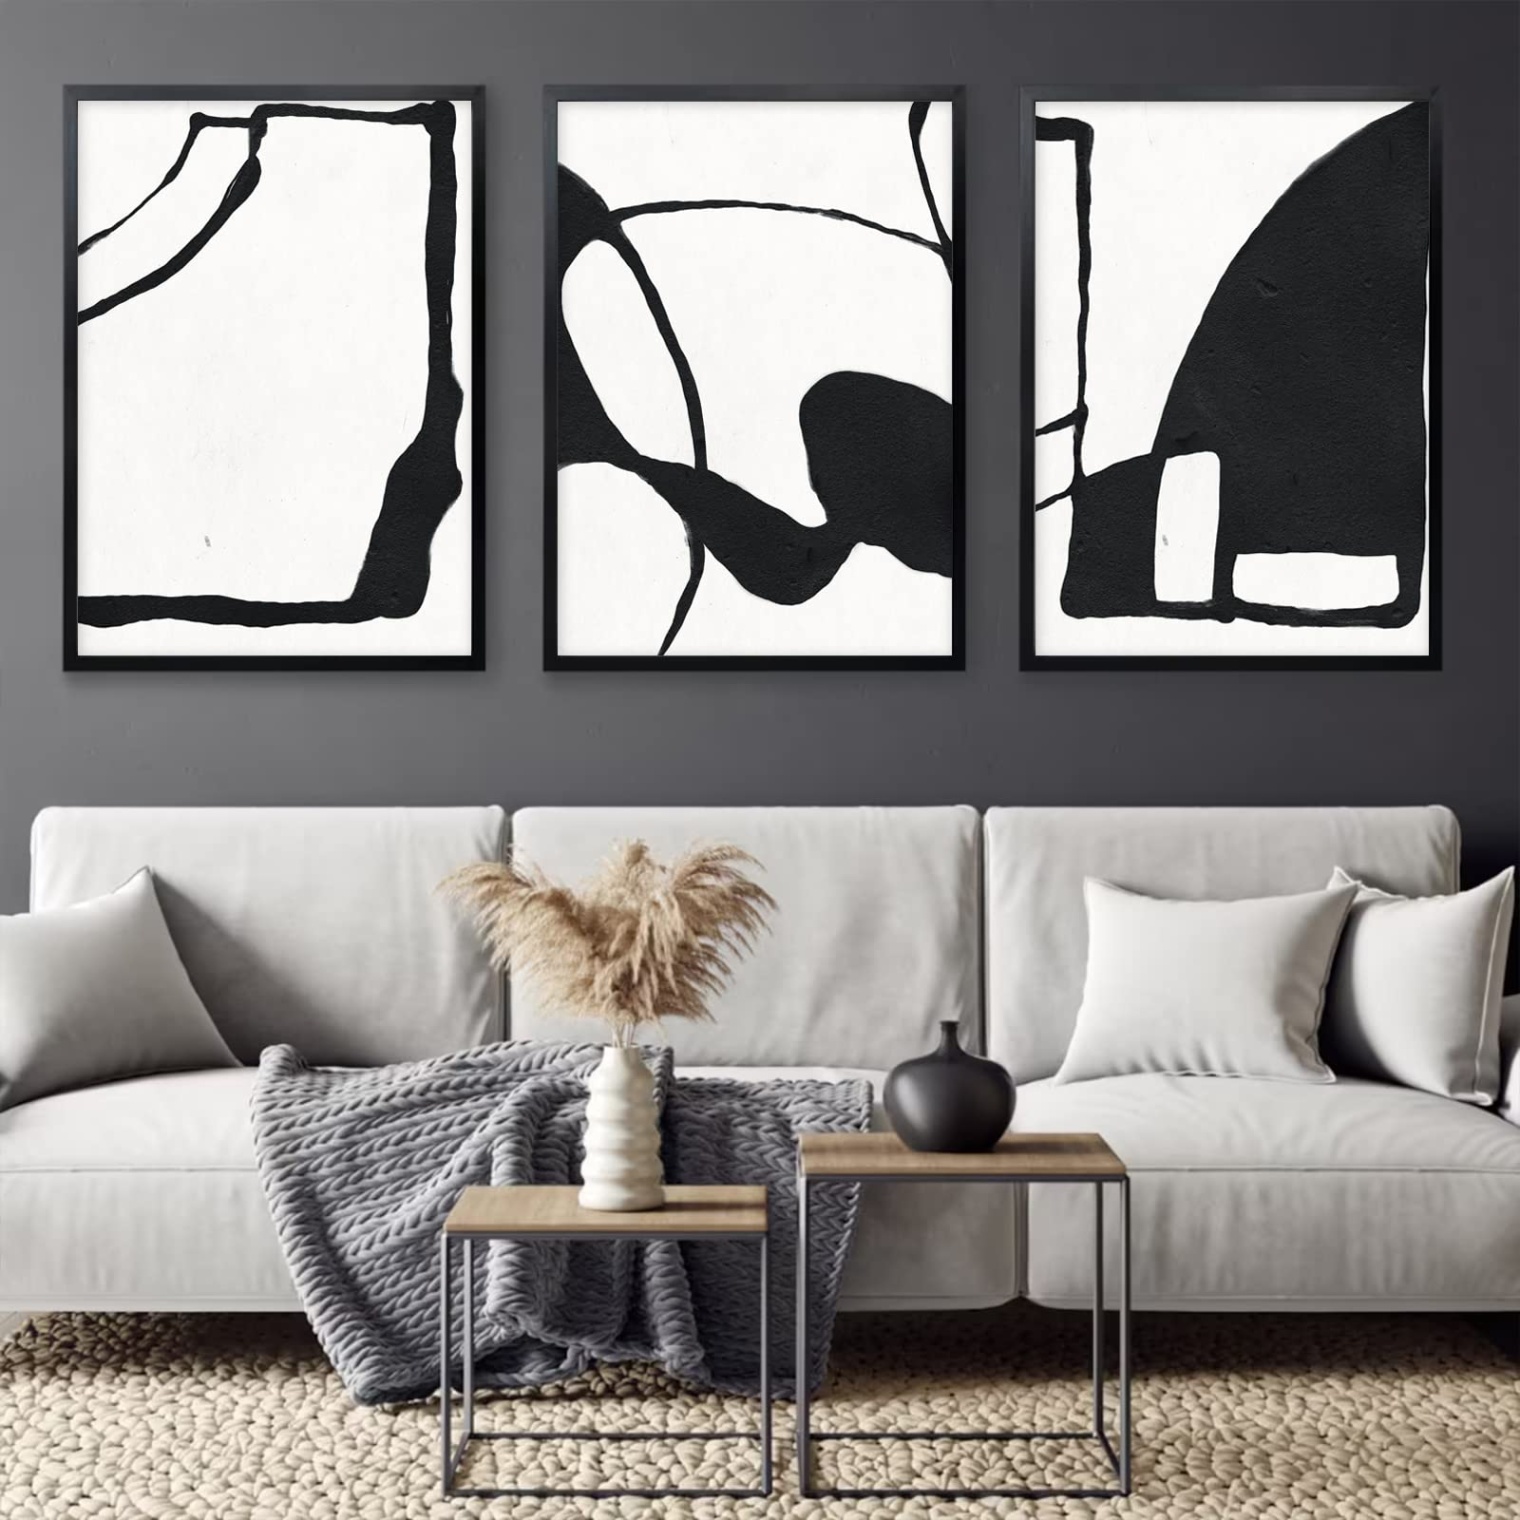 black and white wall decor Niche Utama Home Black and White Wall Art Modern Abstract Canvas Wall Art Black and White  Artwork for Walls Minimalist Black and White Geometric Painting for Living